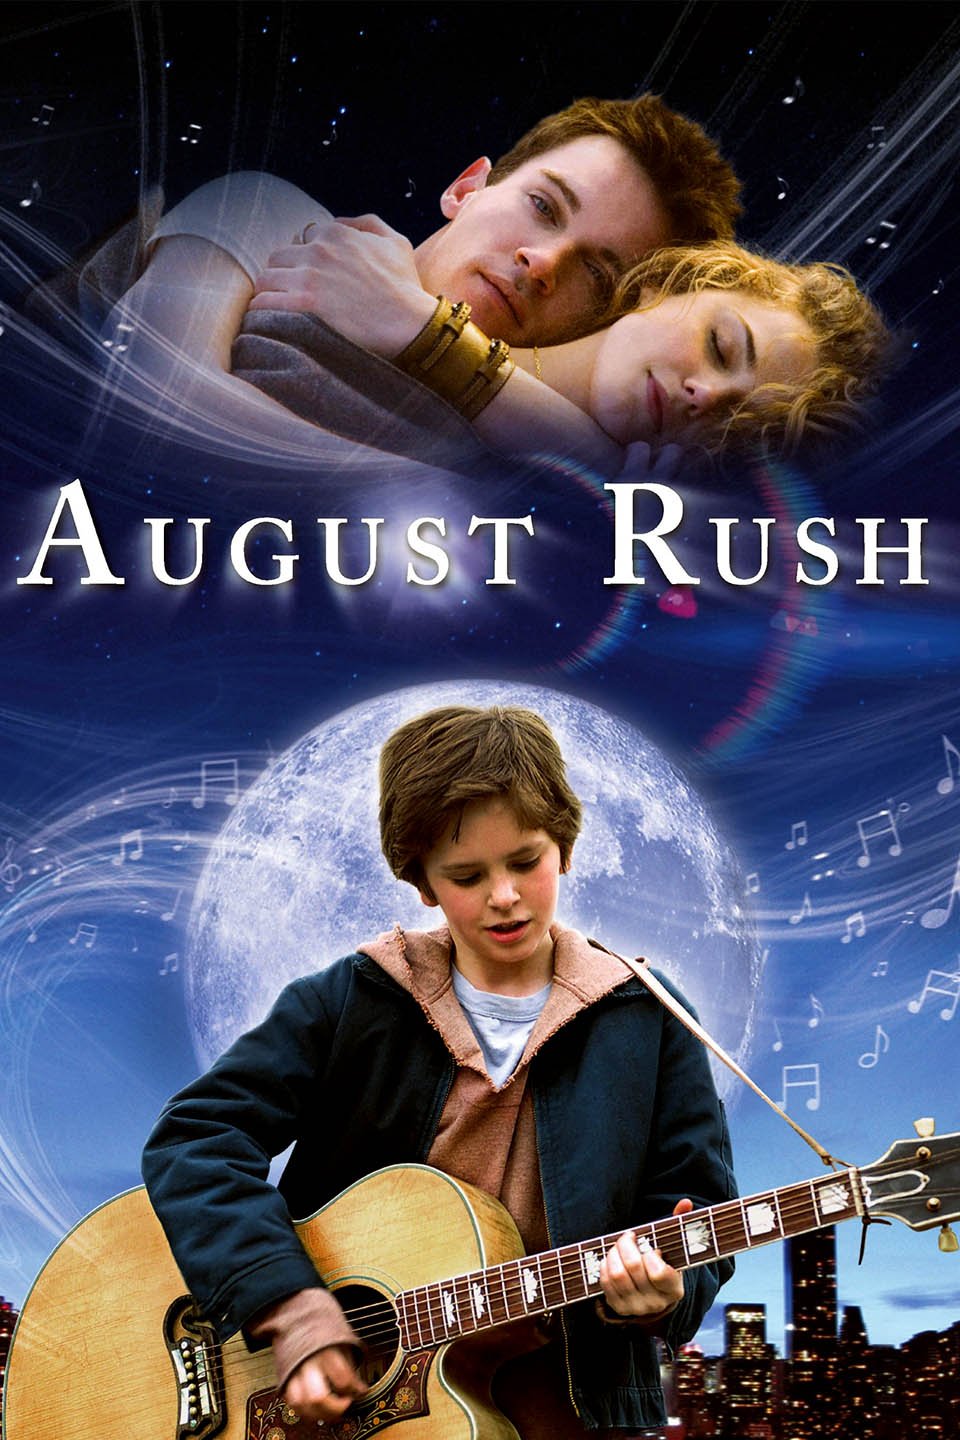 movie review about august rush